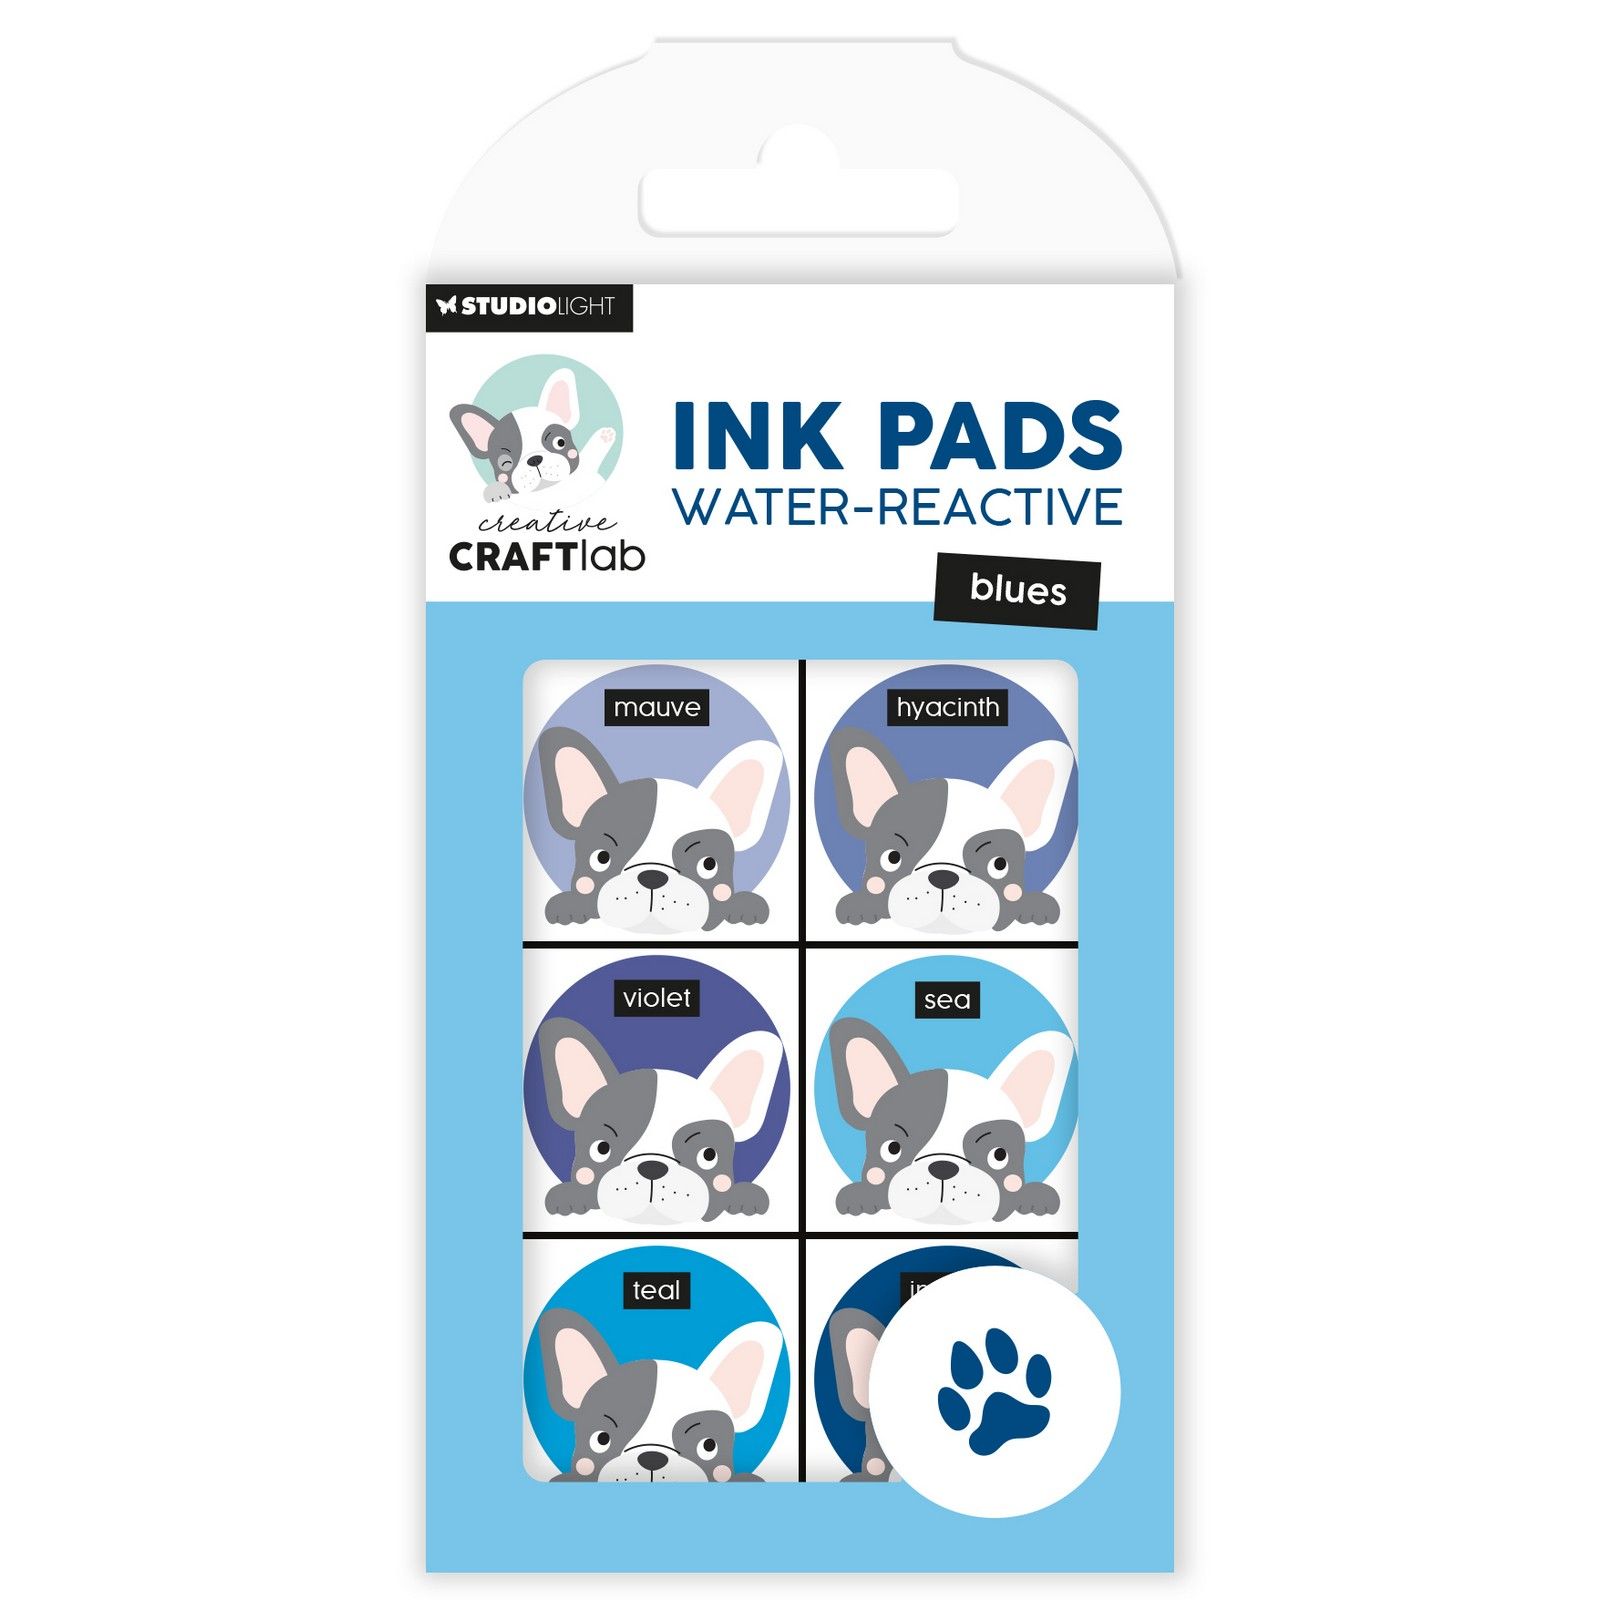 Creative Craftlab • Essentials Ink Pads Water-Reactive Blues